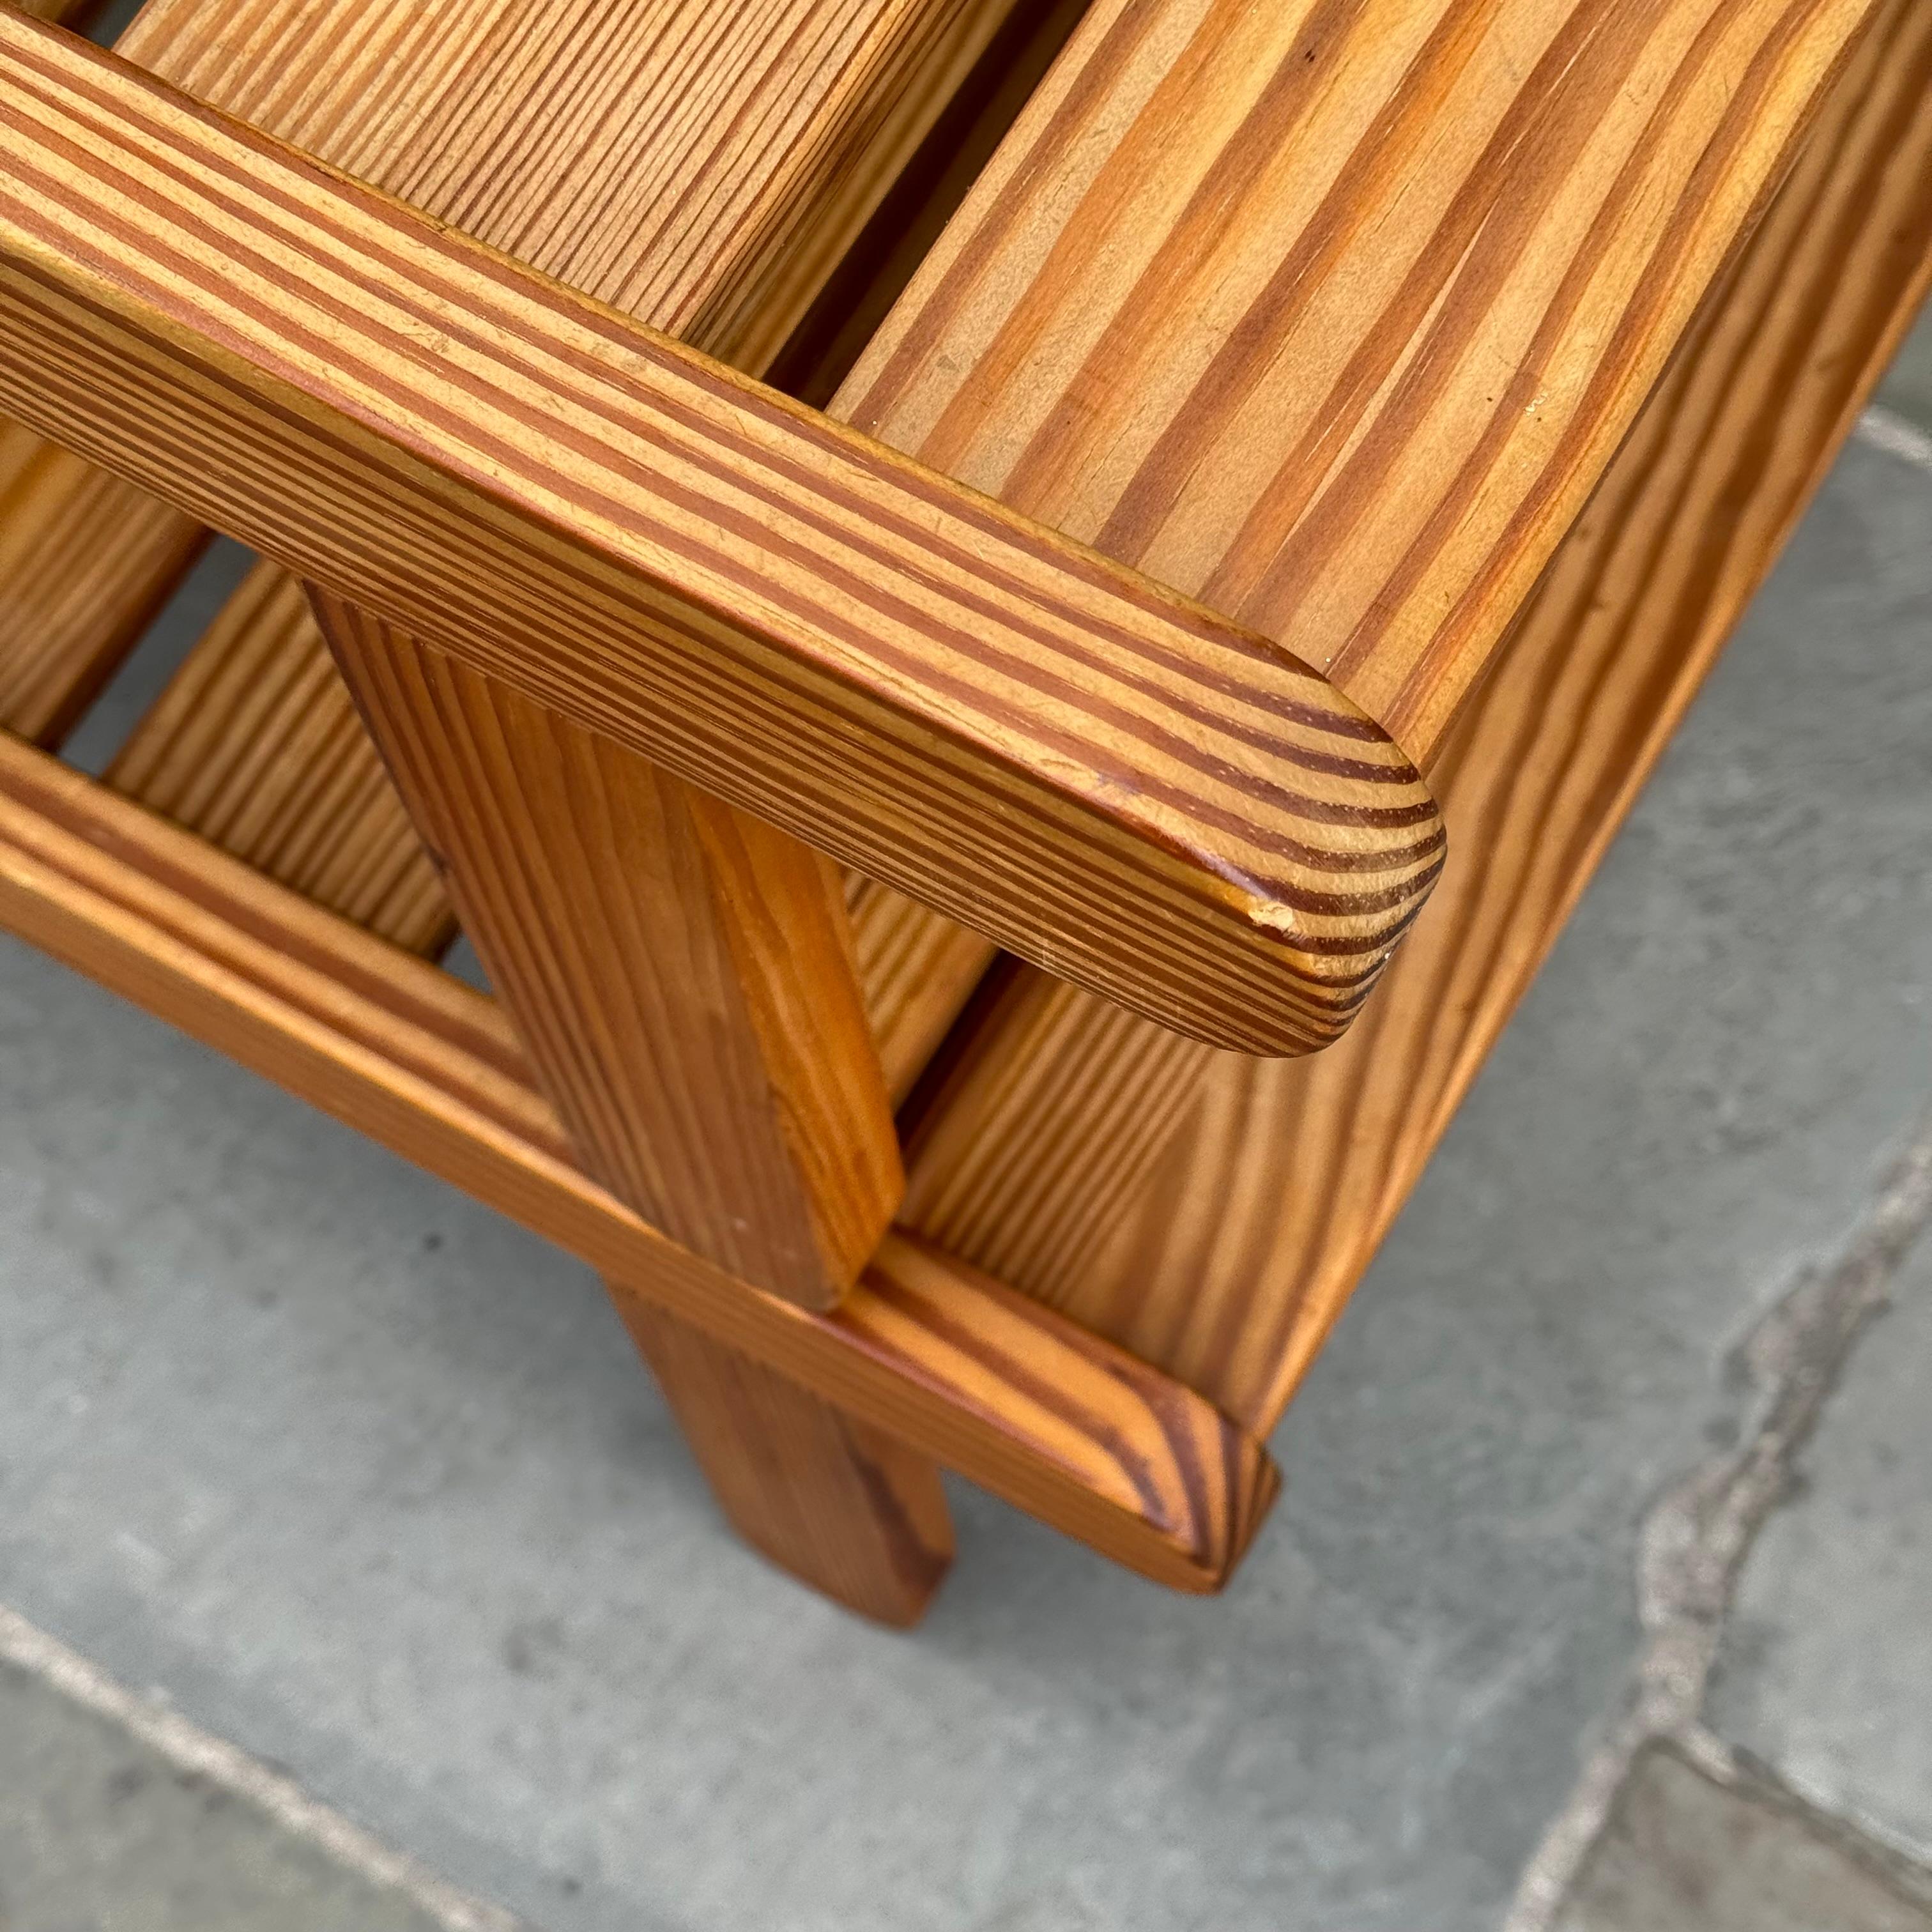 A pair of pine benches designed by Danish designer, Bernt Petersen, in the 1960s. 

Low enough to be used as coffee tables or as occasional seating, the simple construction of this pair of benches is enhanced by the linear striations of the pine